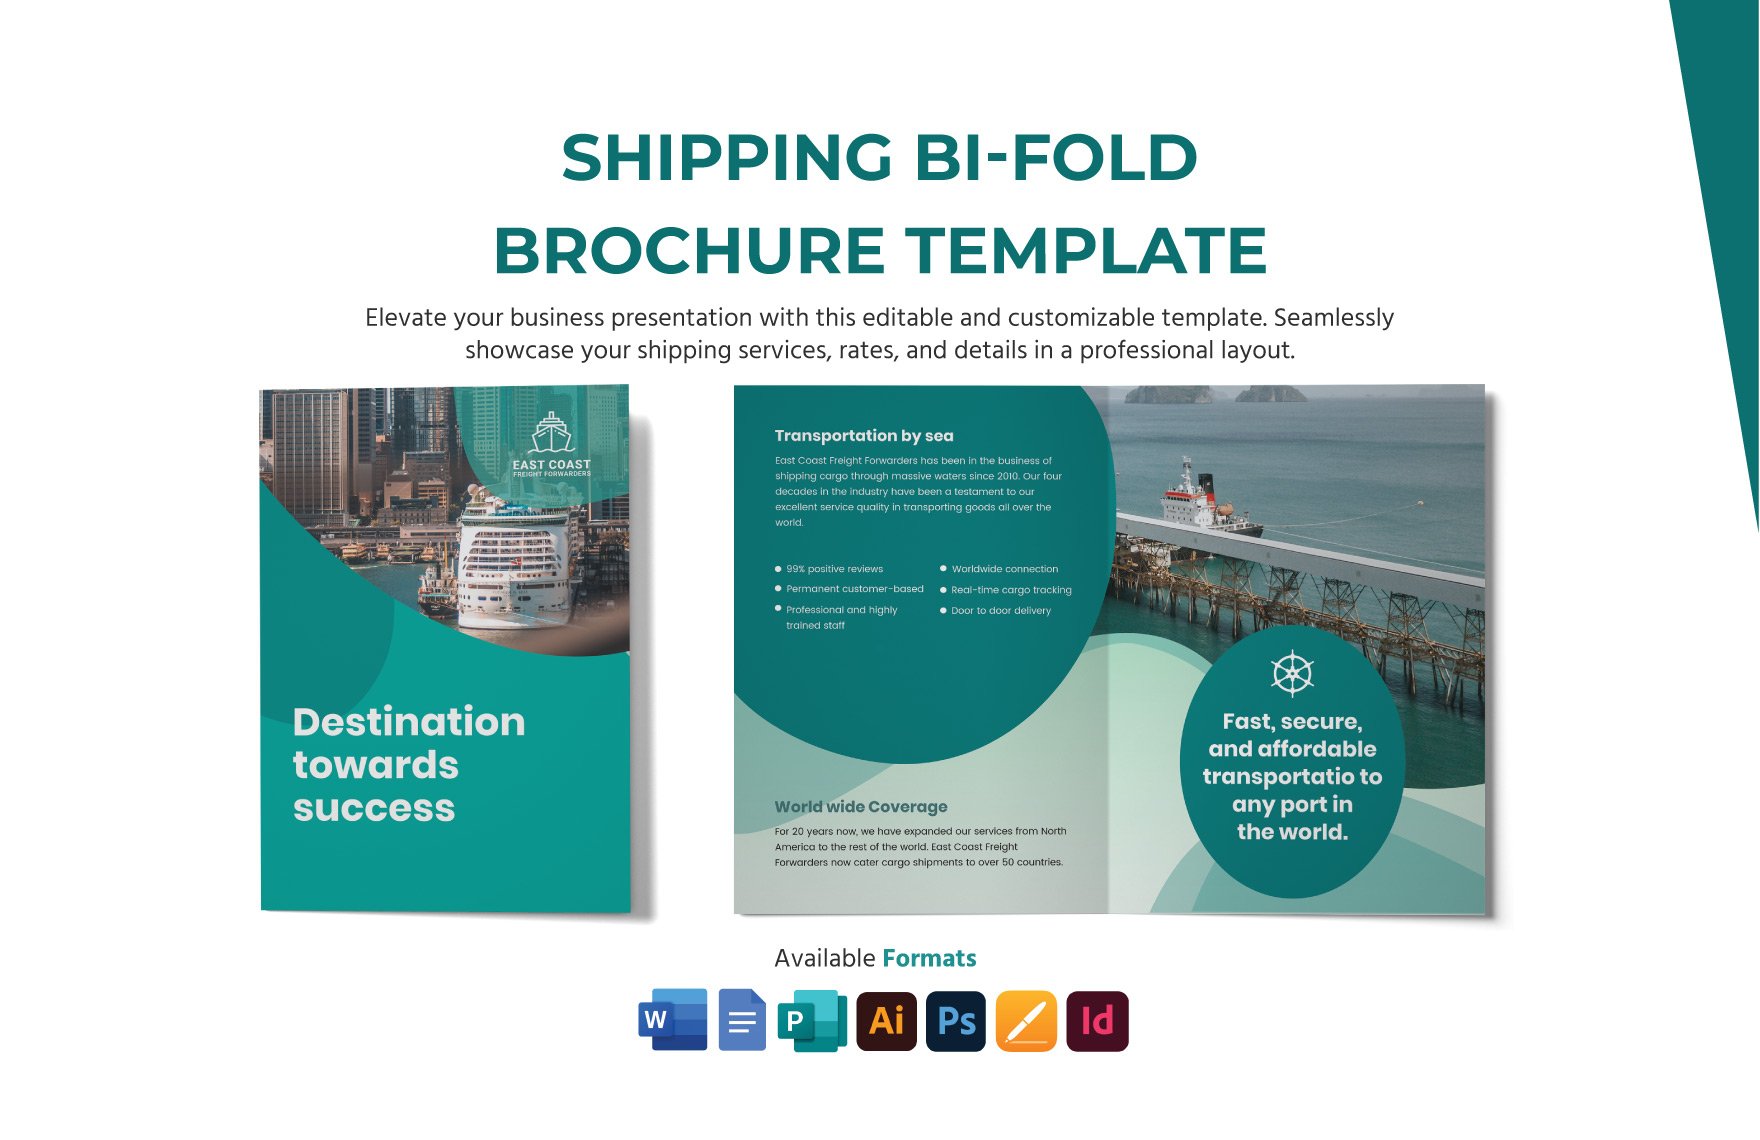 Shipping Bi-Fold Brochure Template in Word, Google Docs, Illustrator, PSD, Apple Pages, Publisher, InDesign